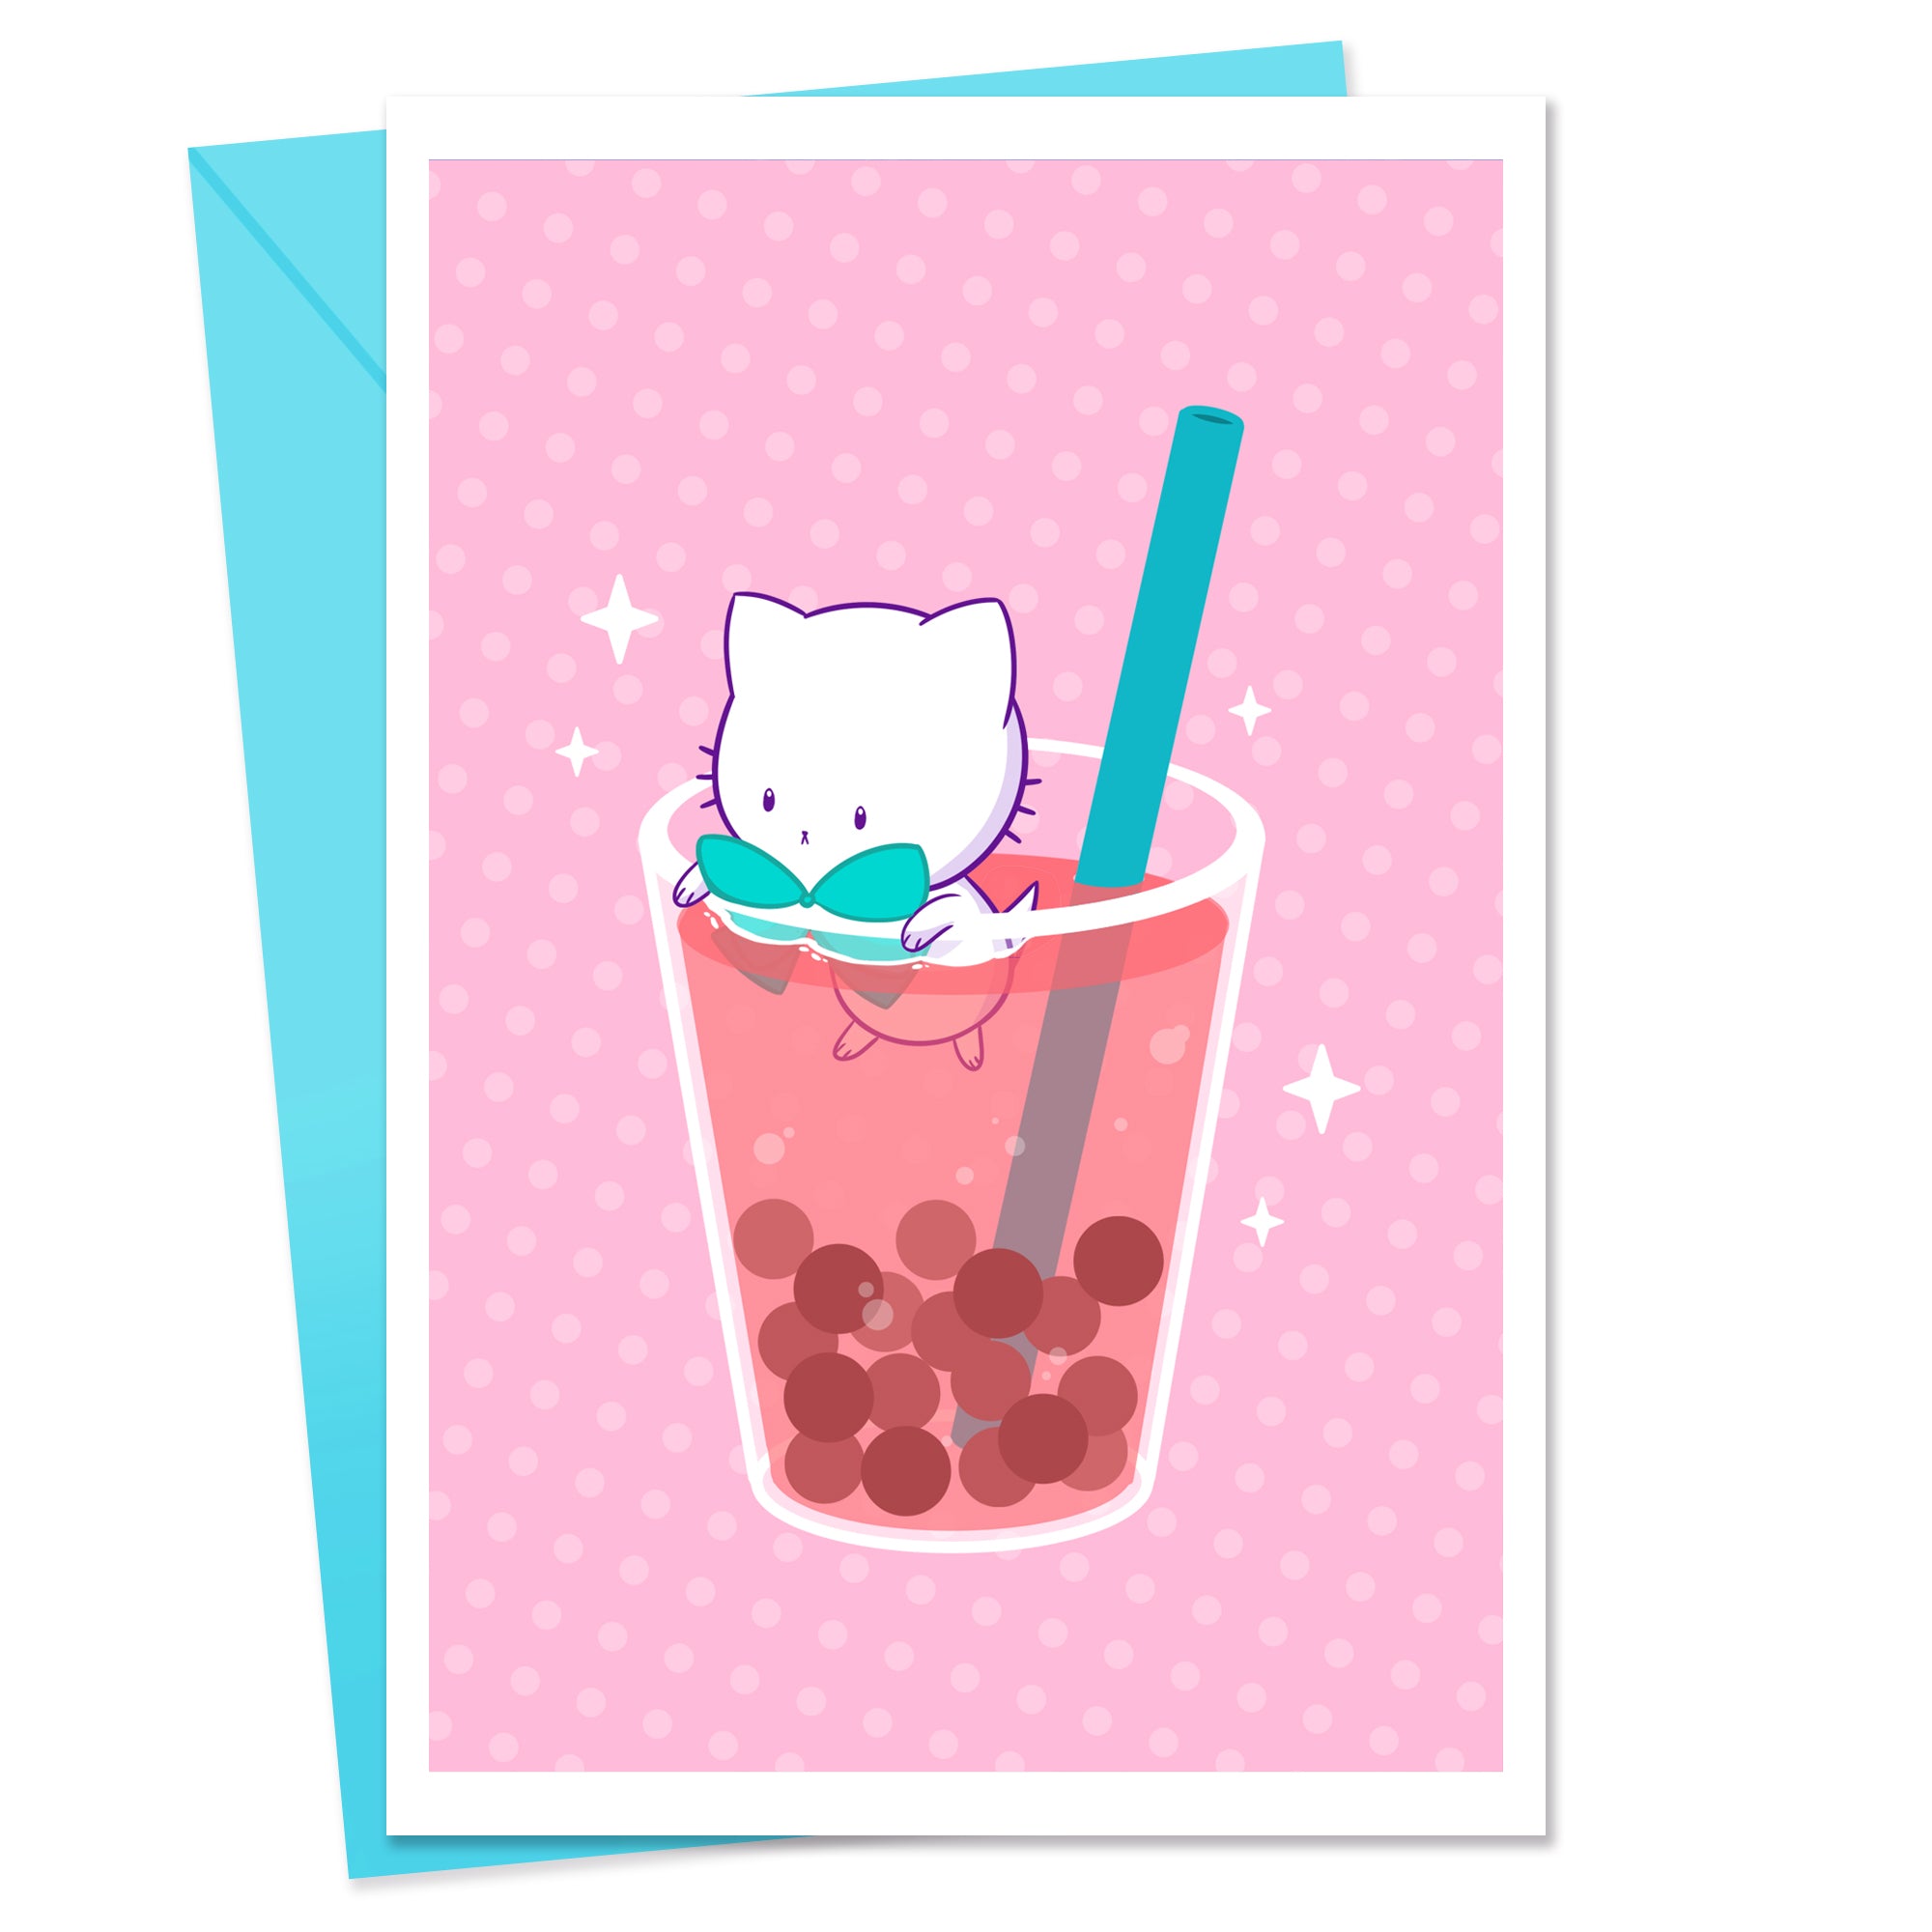 Bubble Kittea in a Cup Greeting Card